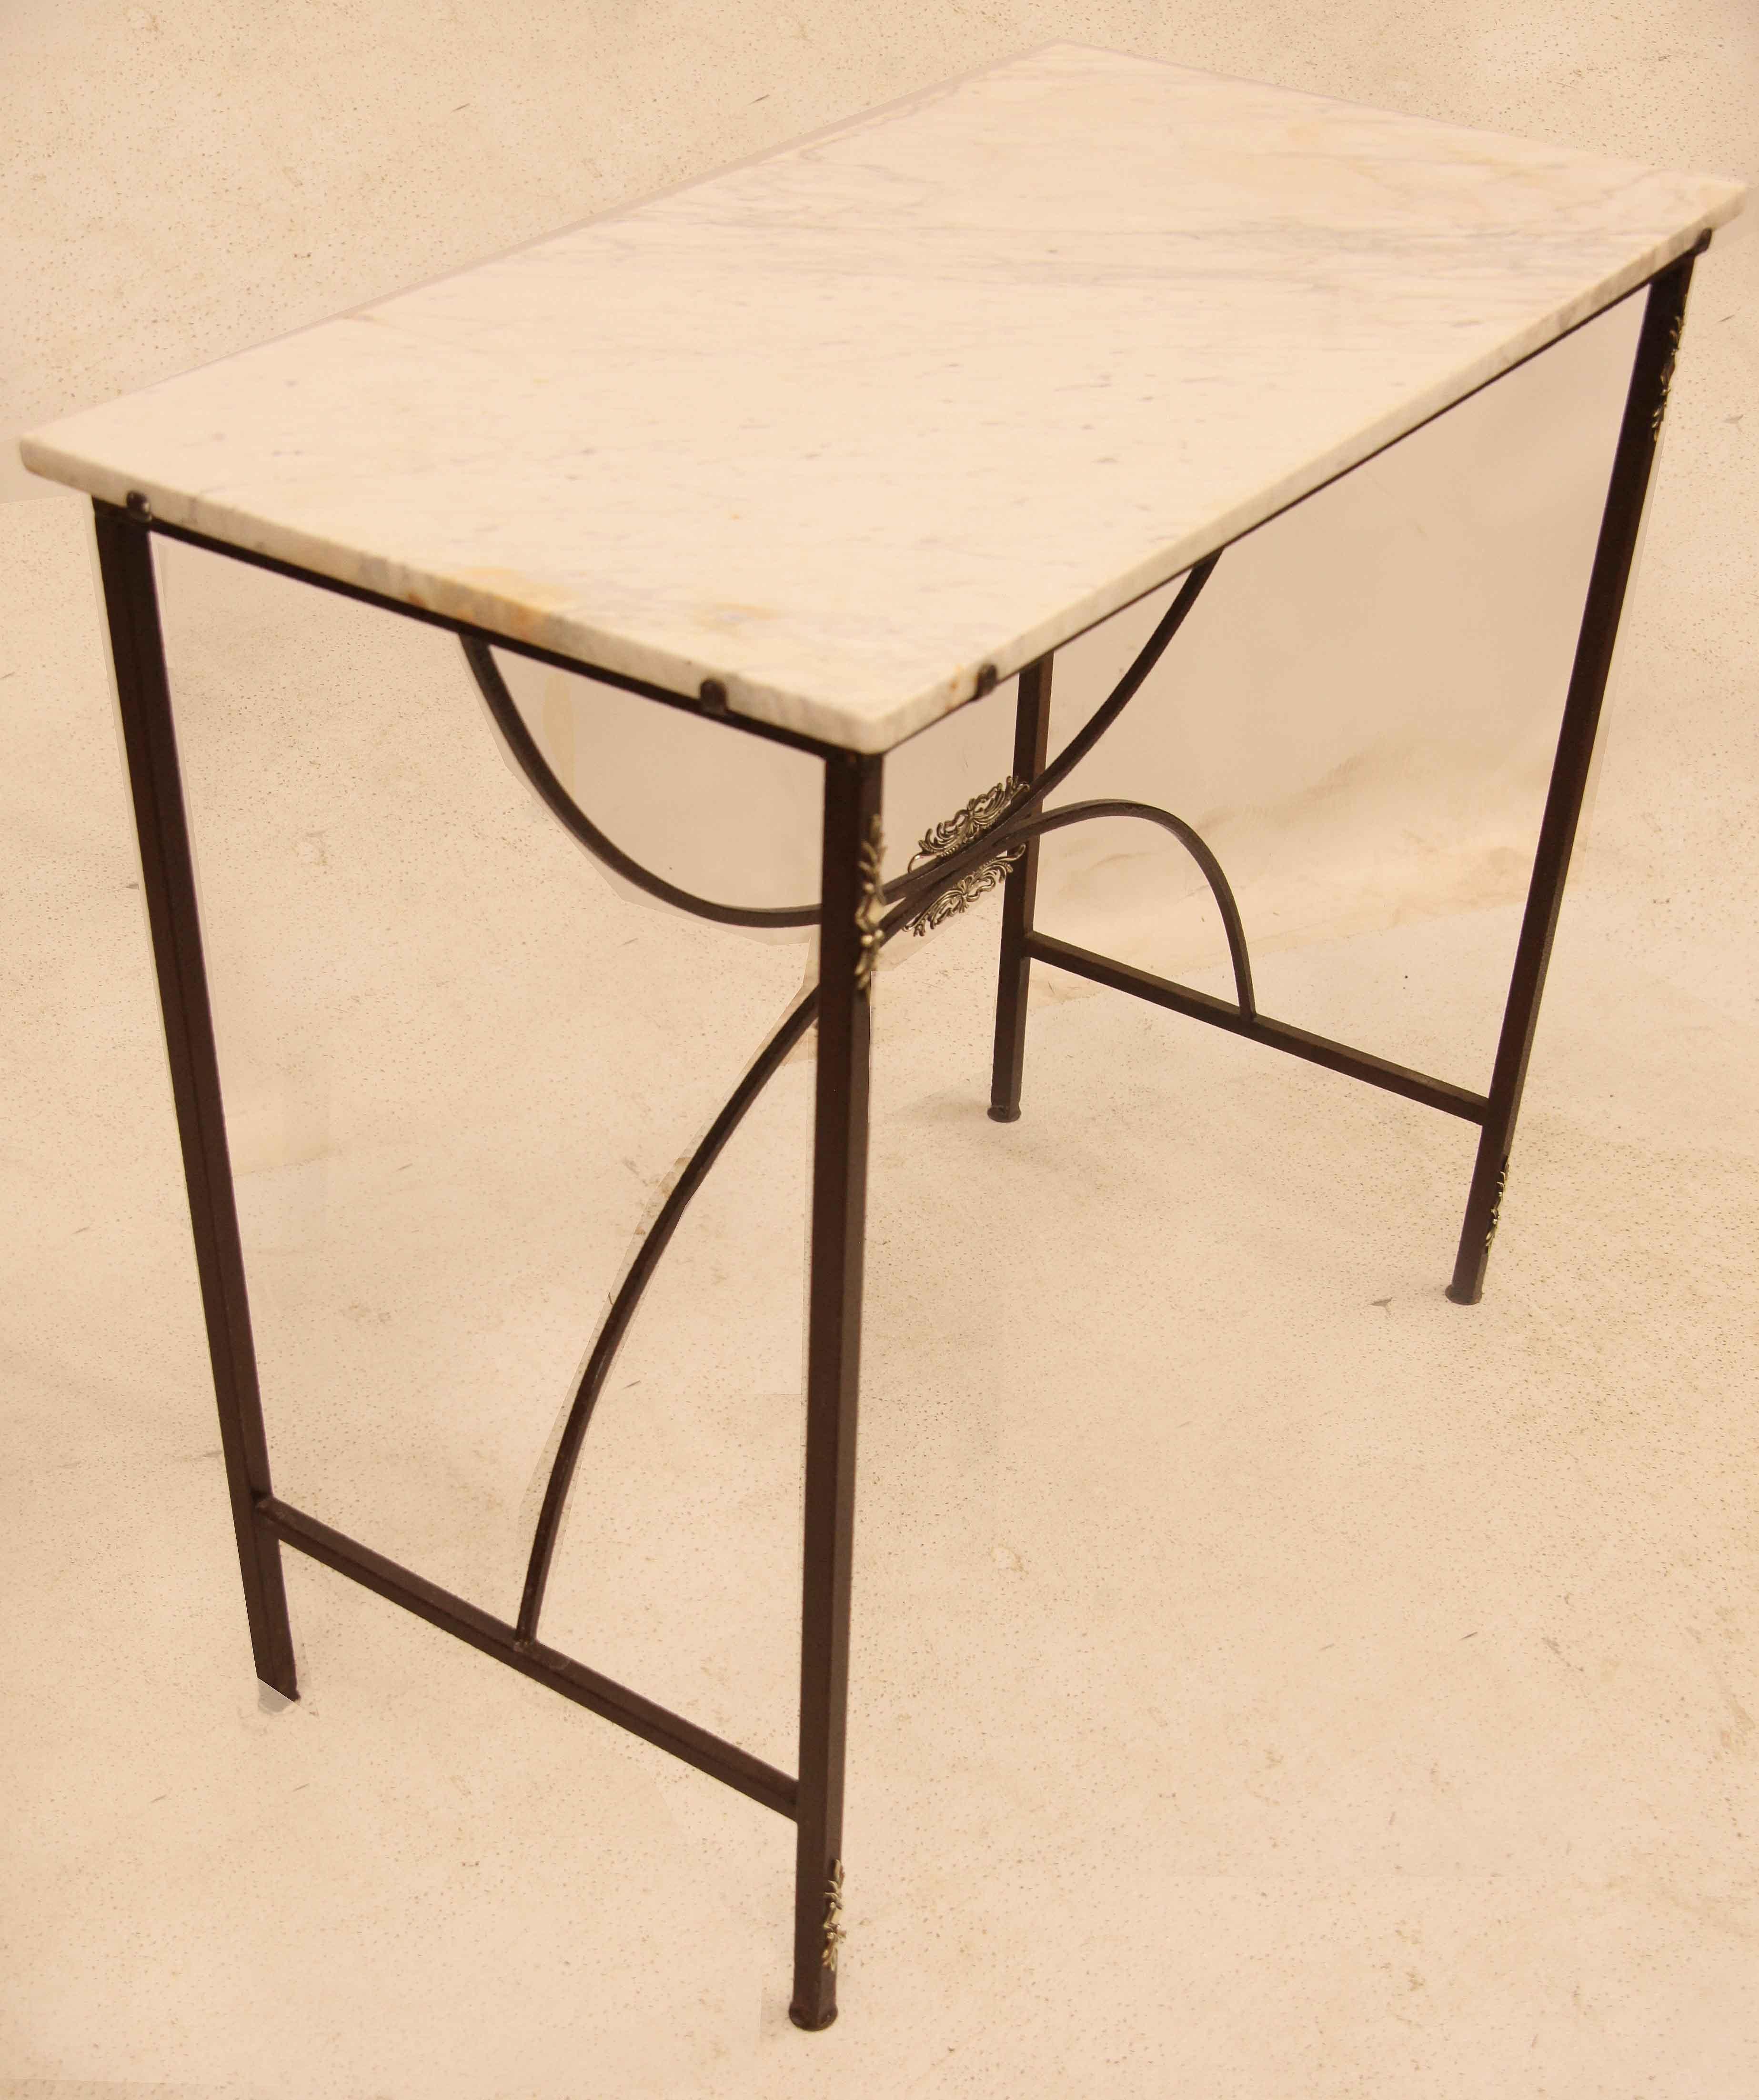 French marble console table,  the white marble with gray veining originally had a gallery around the sides and back. The front legs have brass appliques at the top and bottom .  There are stretchers supporting each side and demi-lune stretchers